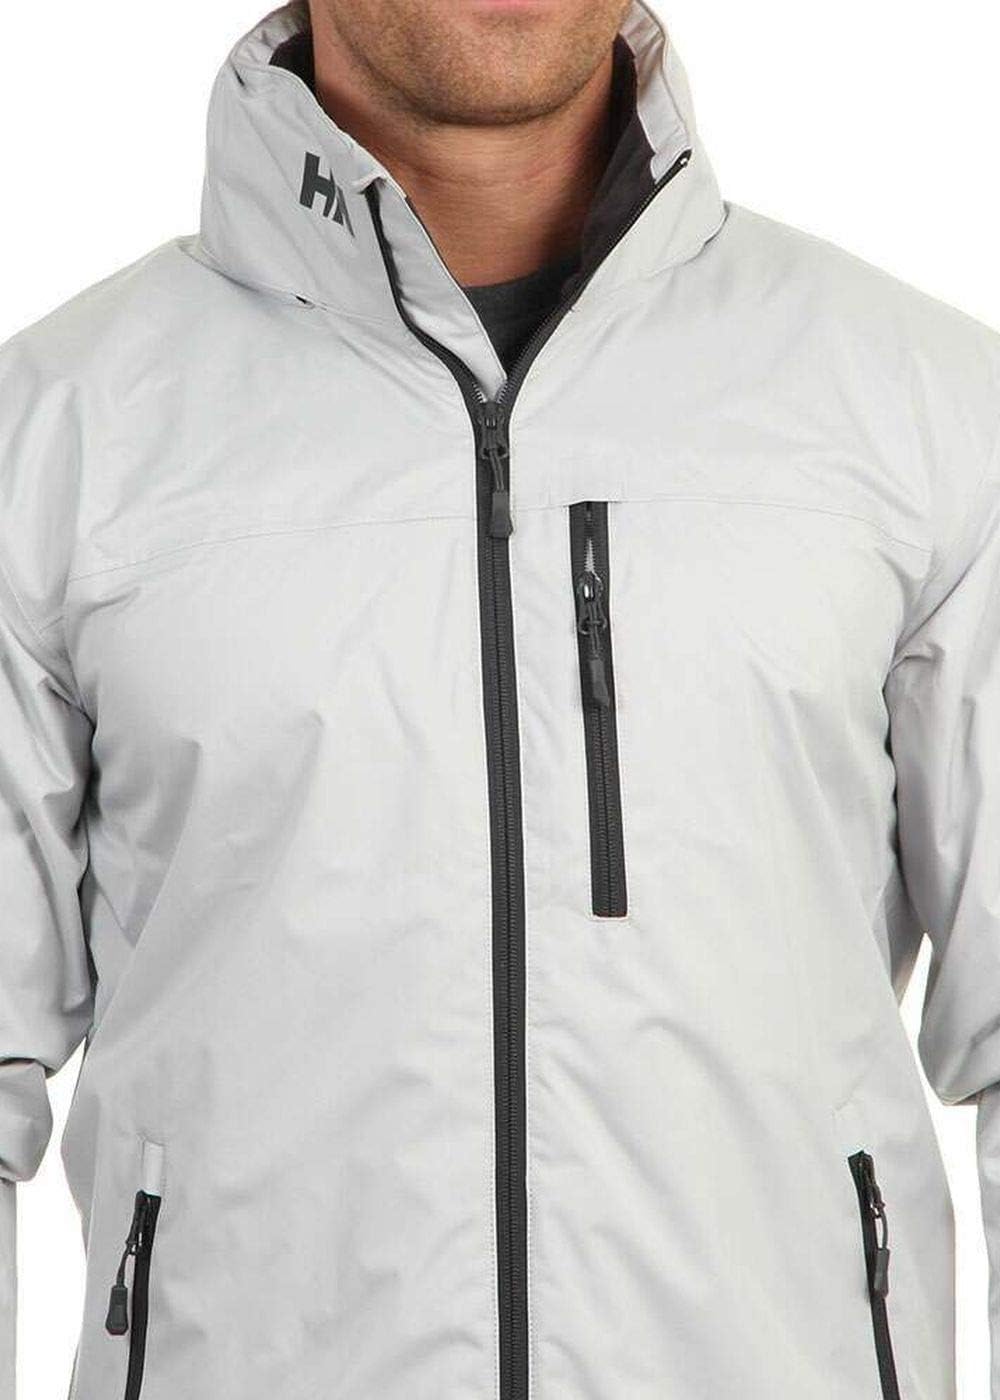 Read more about the article Helly-Hansen Mens Crew Hooded Waterproof Sailing Jacket Review